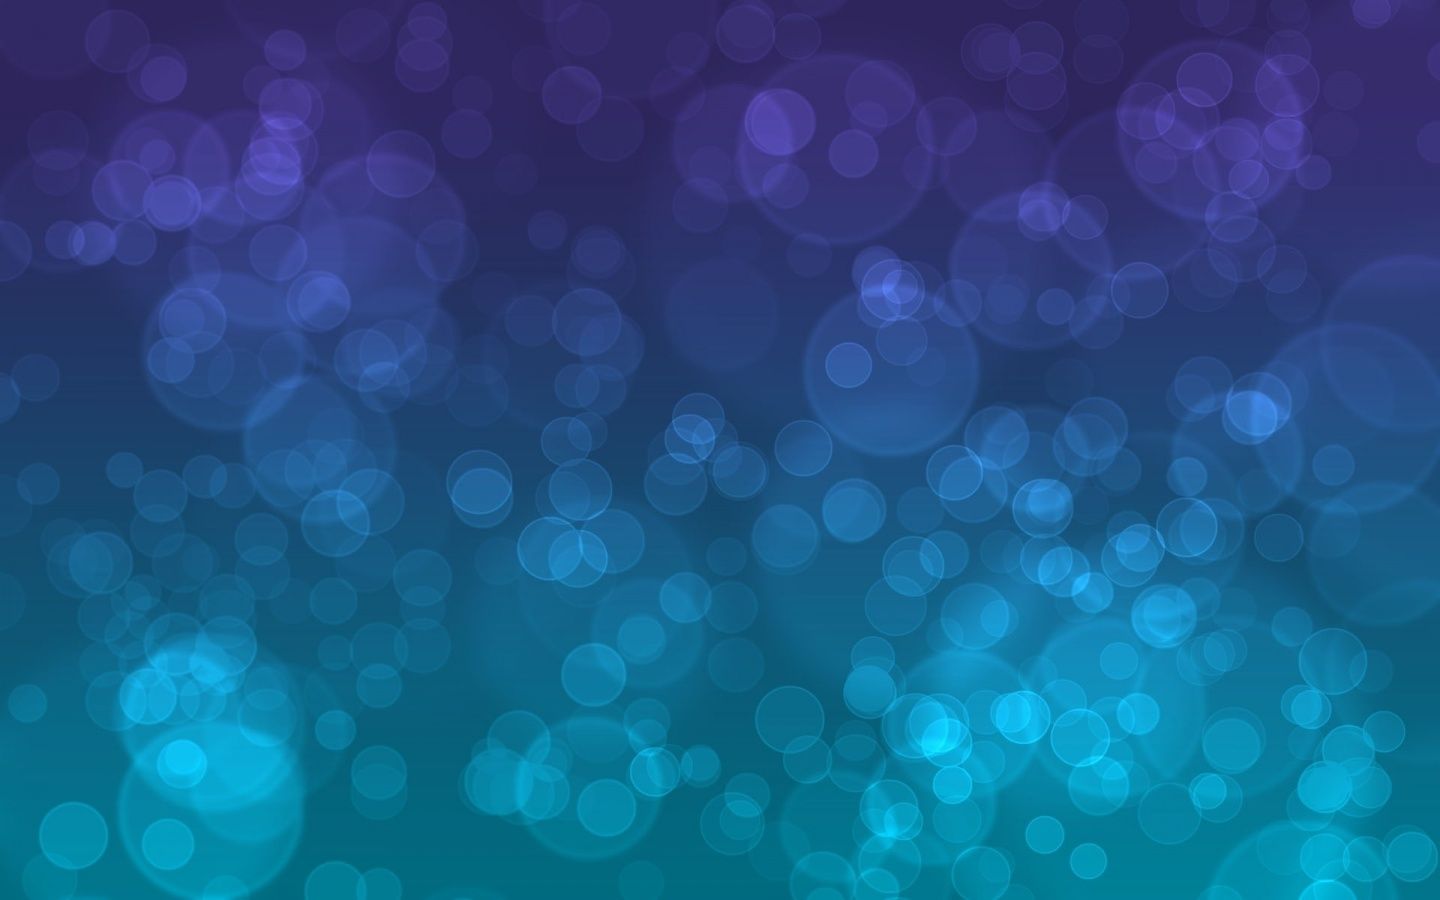 Free download 1440x900 Bubbles Purple Blue desktop PC and Mac wallpaper [1440x900] for your Desktop, Mobile & Tablet. Explore Purple and Teal Wallpaper. Teal Blue Wallpaper, Teal and Black